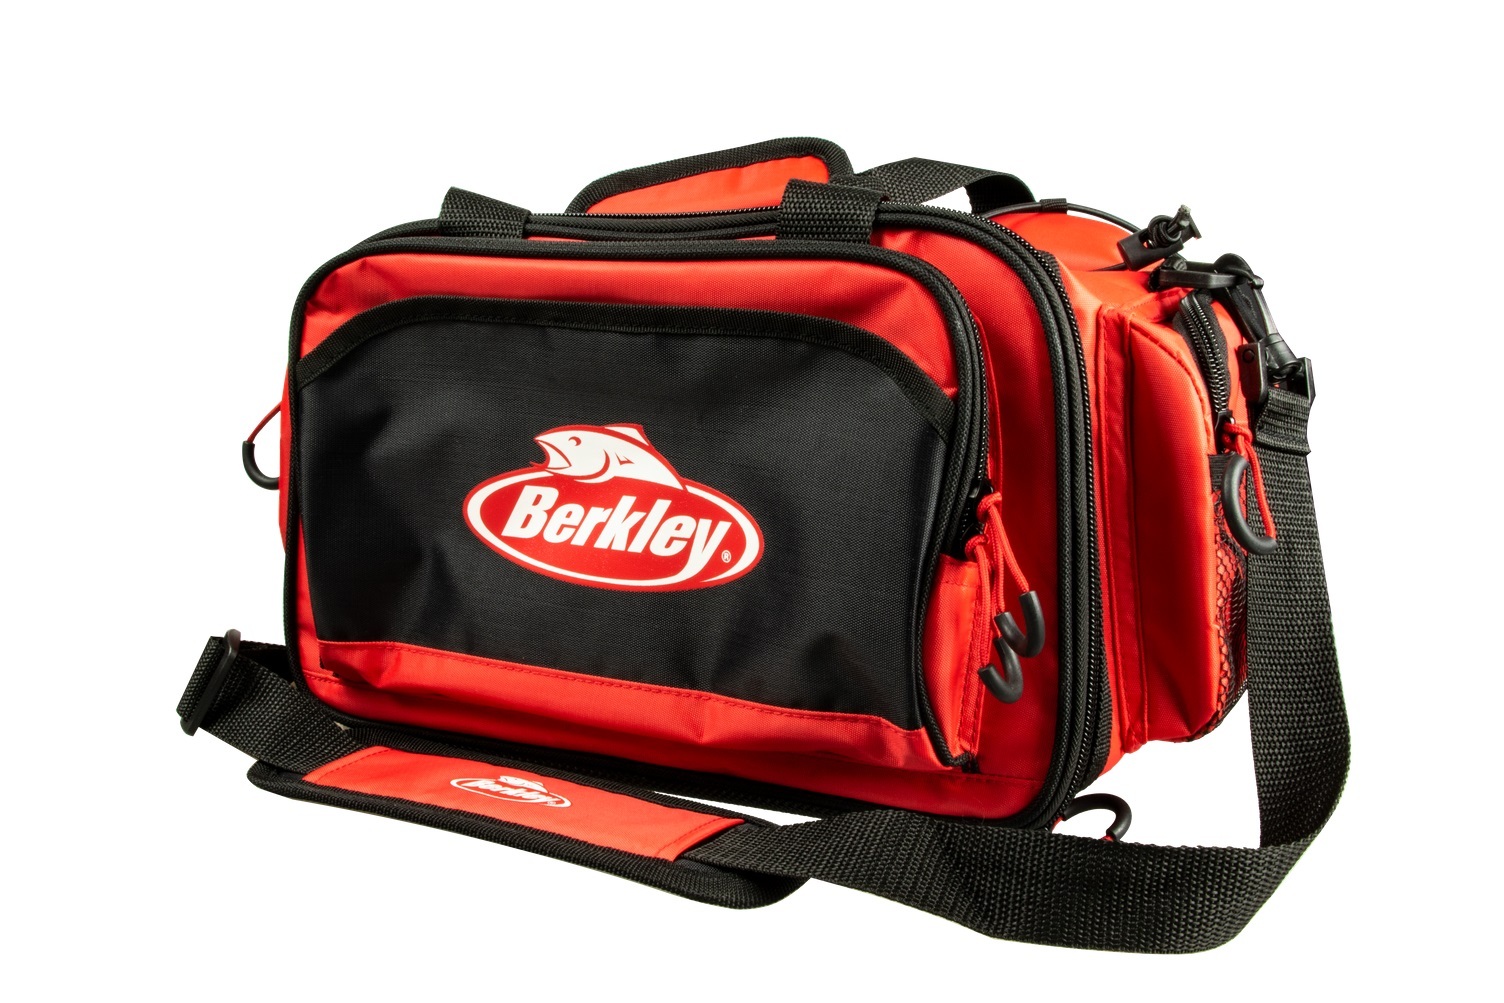 Berkley Large Fishing Tackle Bag With Two Tackle Trays -Multiple Storage  Pockets